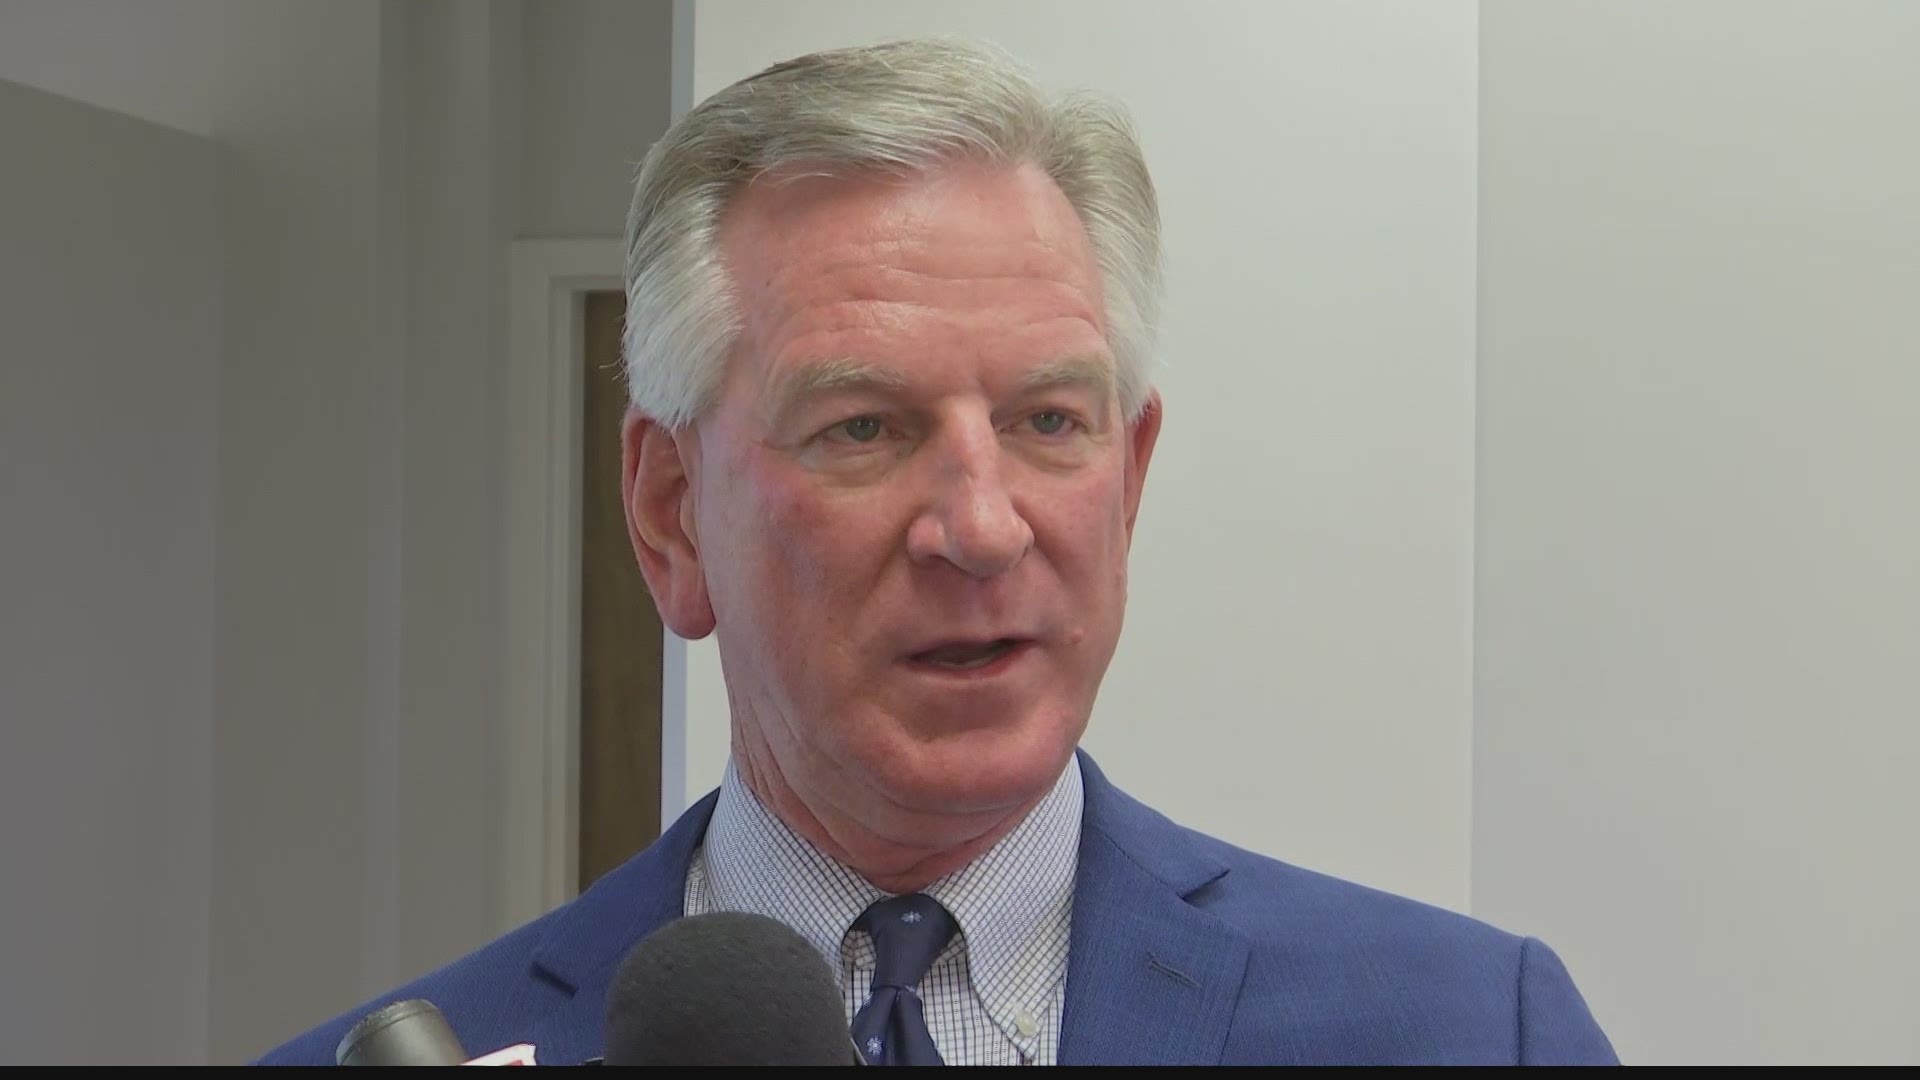 Before traveling to Huntsville, Senator Tommy Tuberville took a trip to McAllen, Texas to get a first hand look at what is happening at the border.